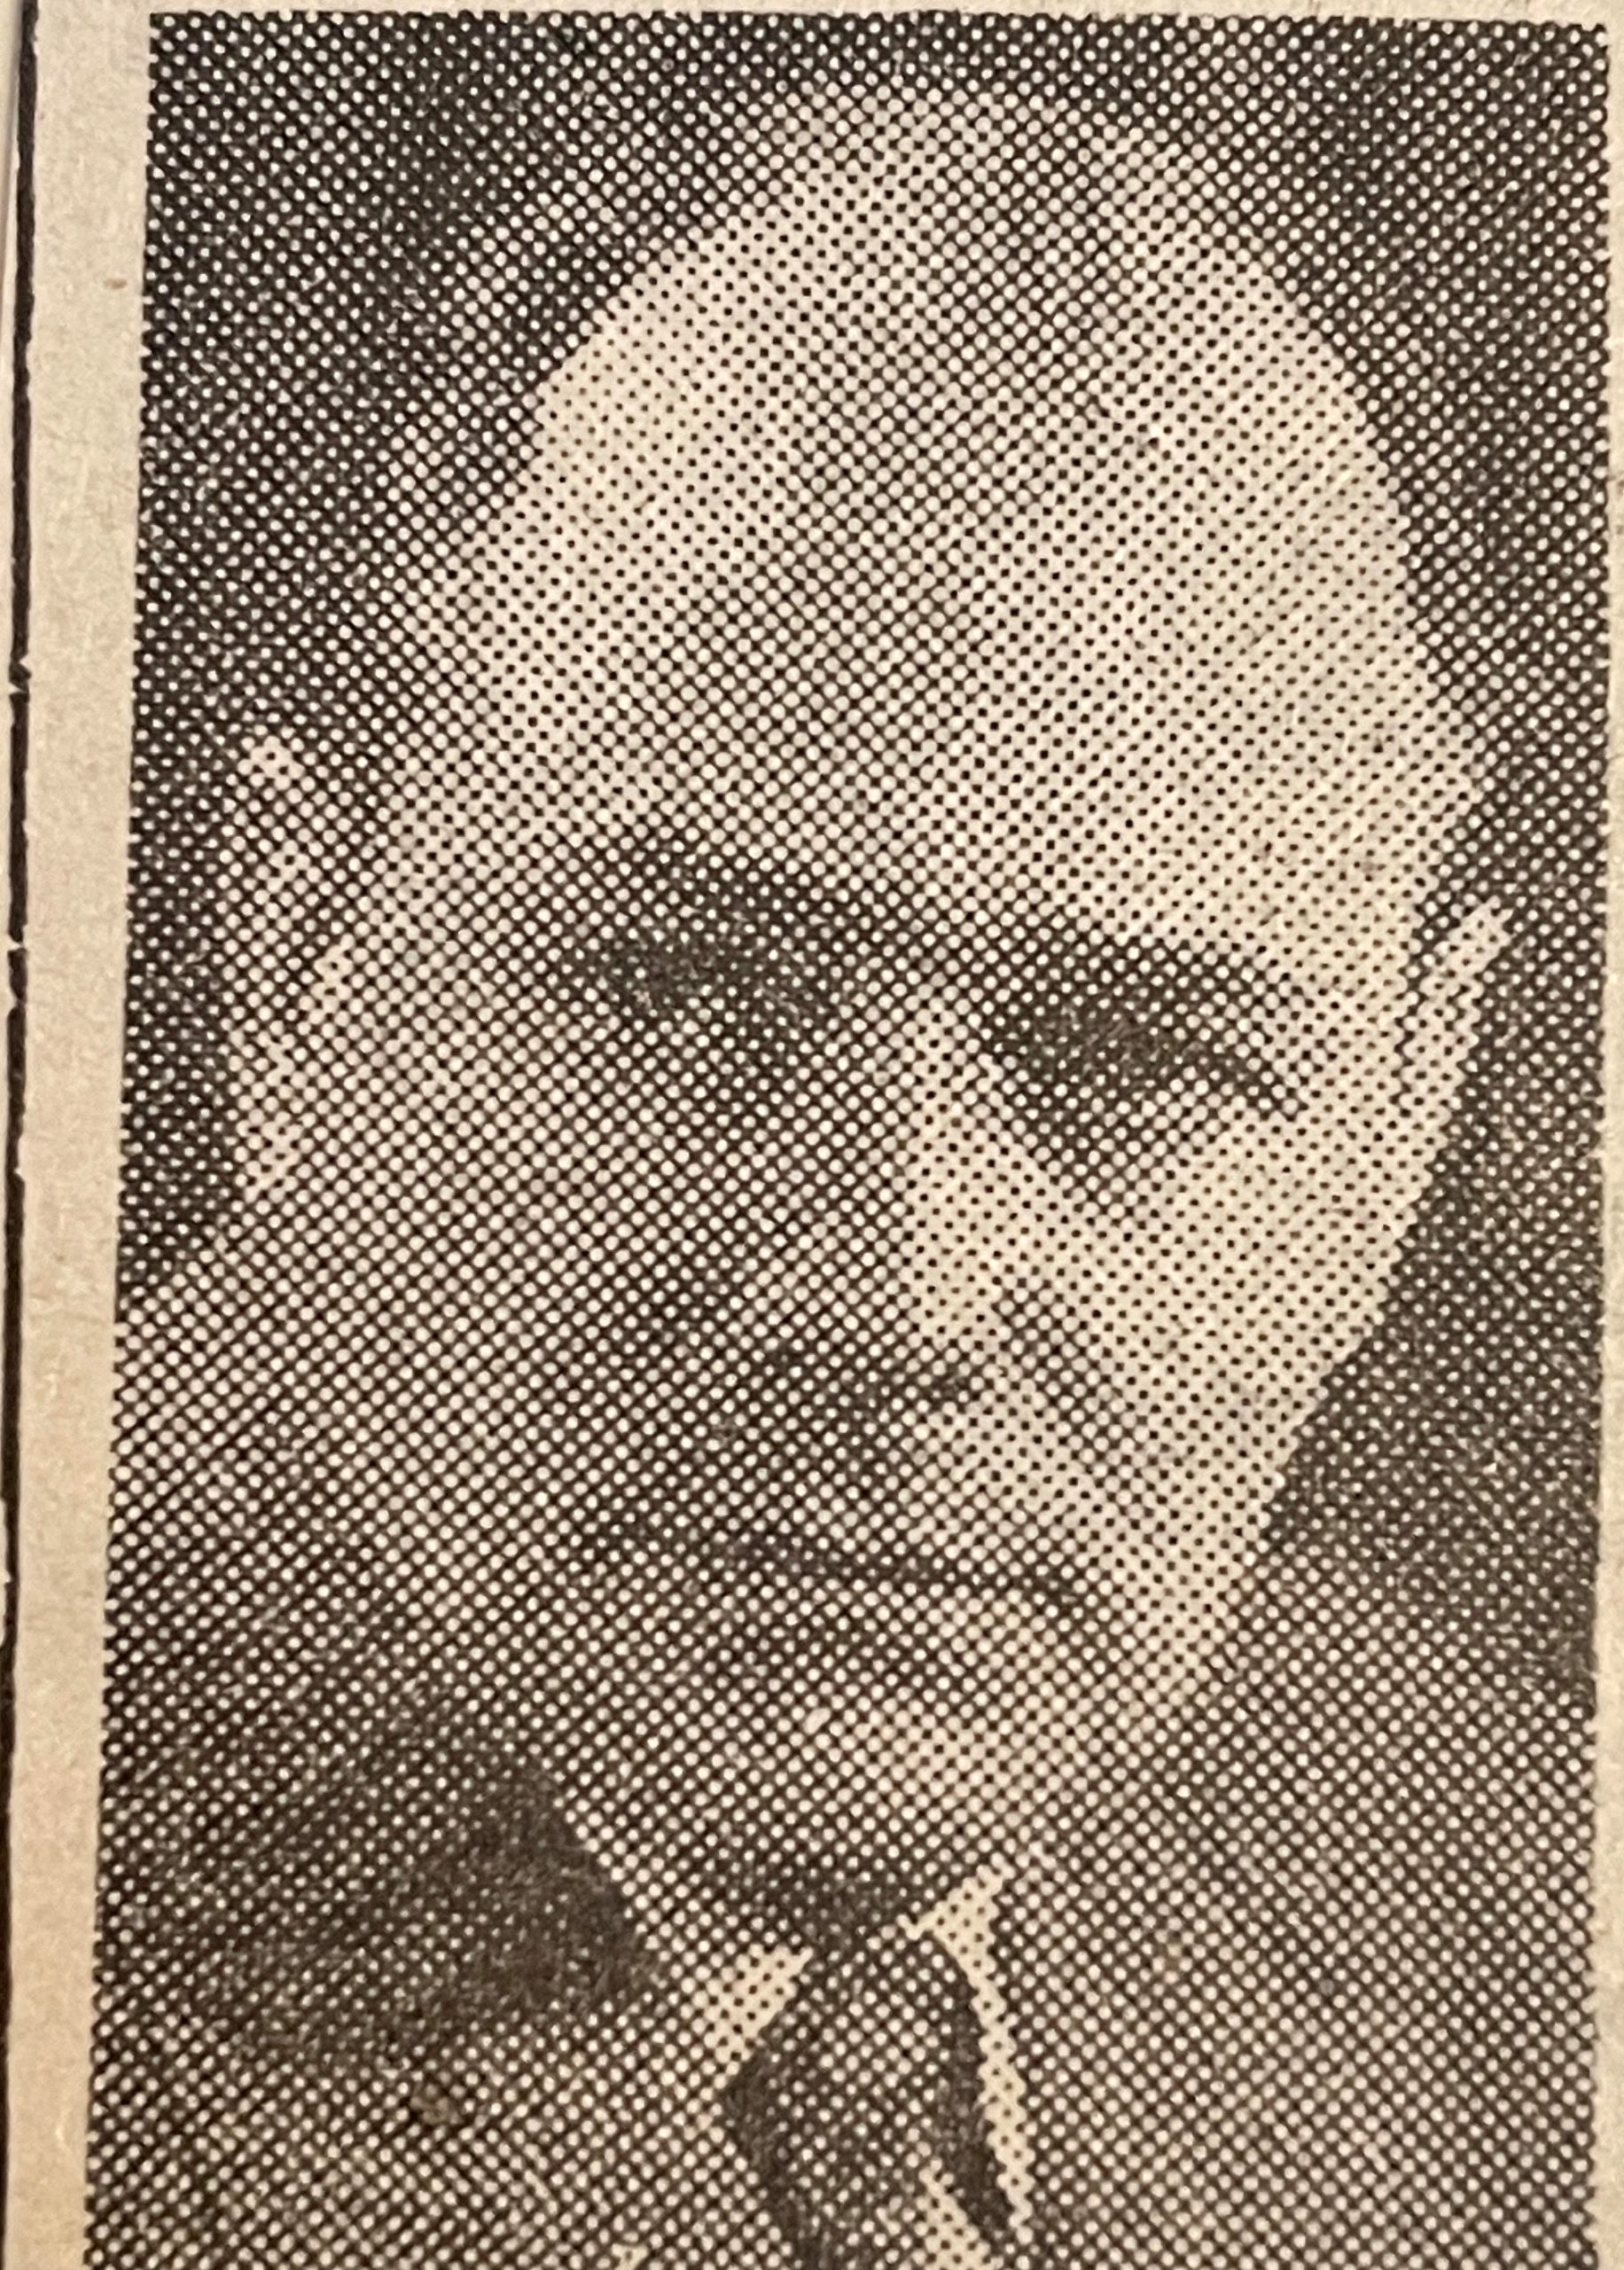 Past Master for 1947